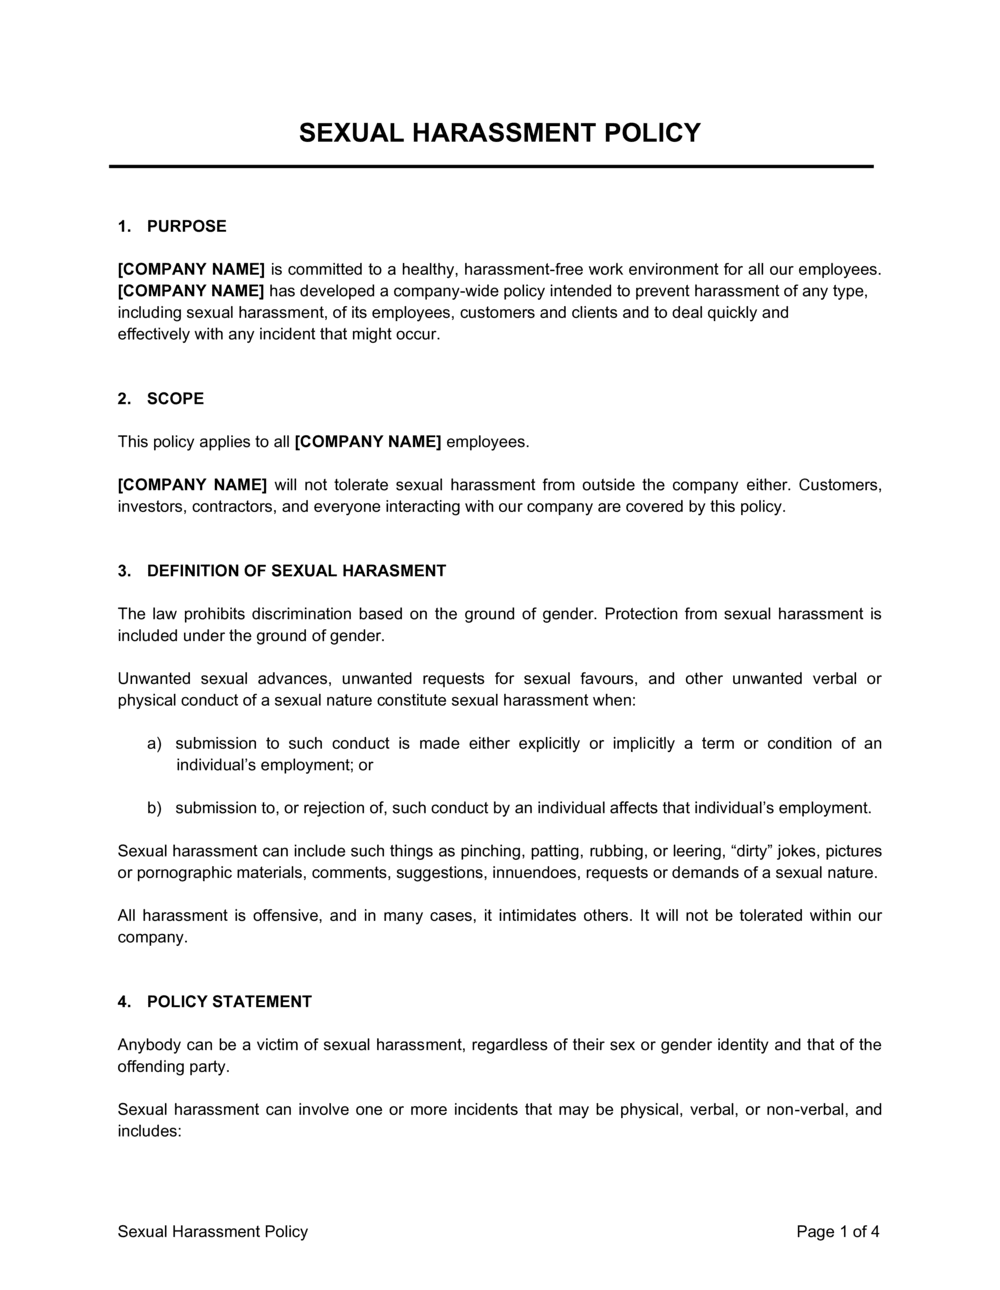 Sexual Harassment Policy Template by BusinessinaBox™